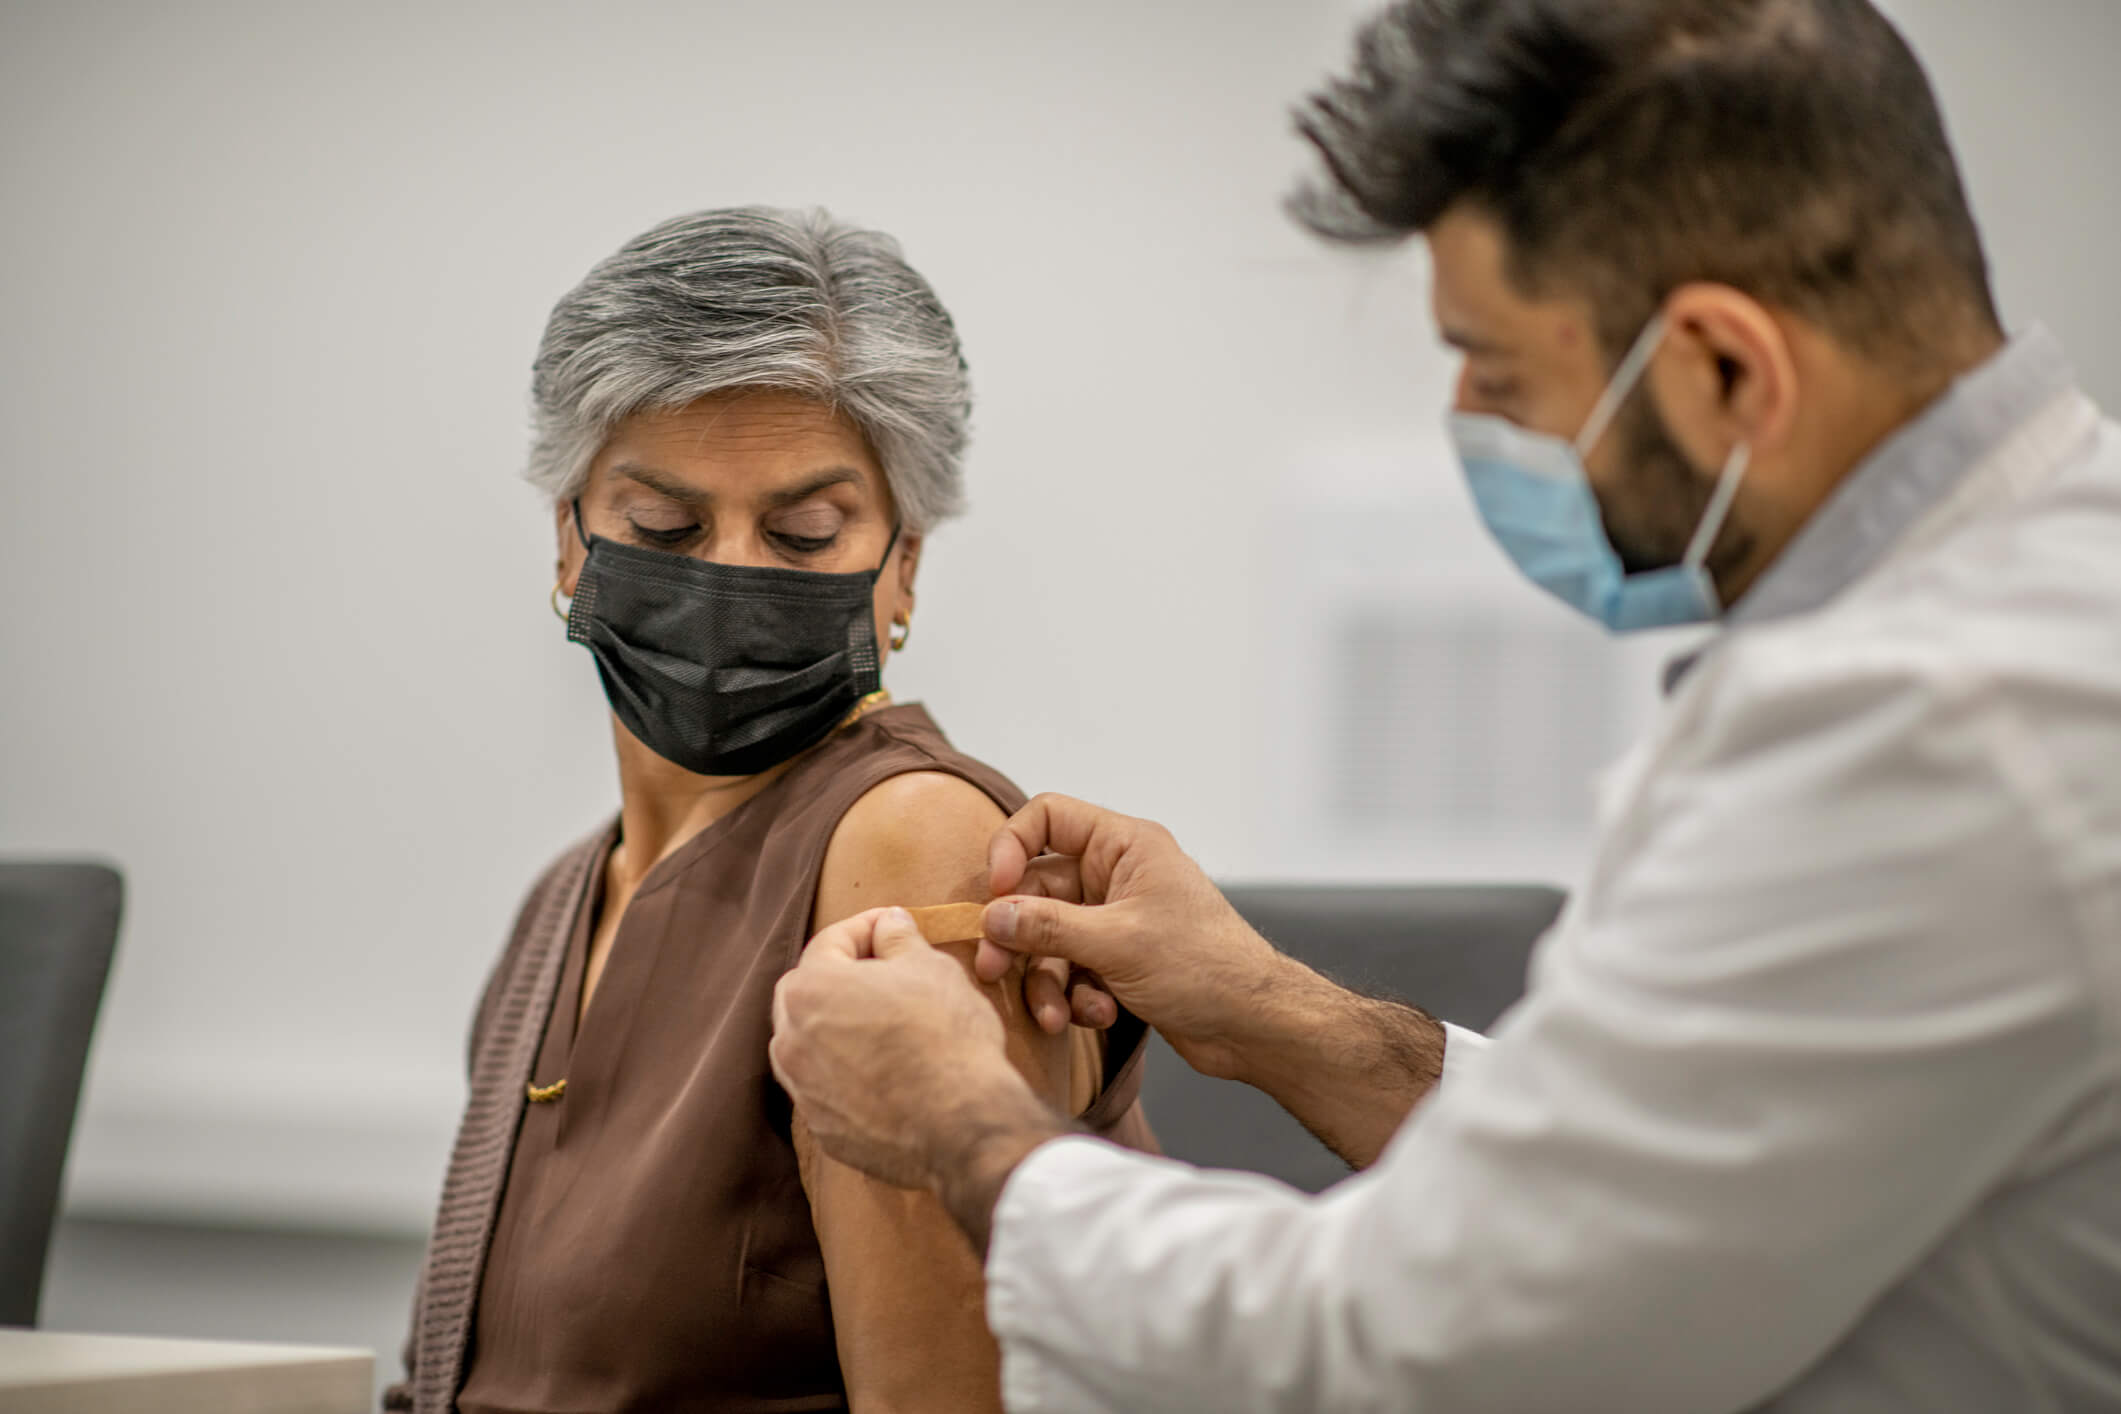 A male doctor puts a band aid on a senior woman's arm after he administered the COVID-19 vaccine injection. They are both wearing a protective face mask to protect themselves from the transfer of germs.